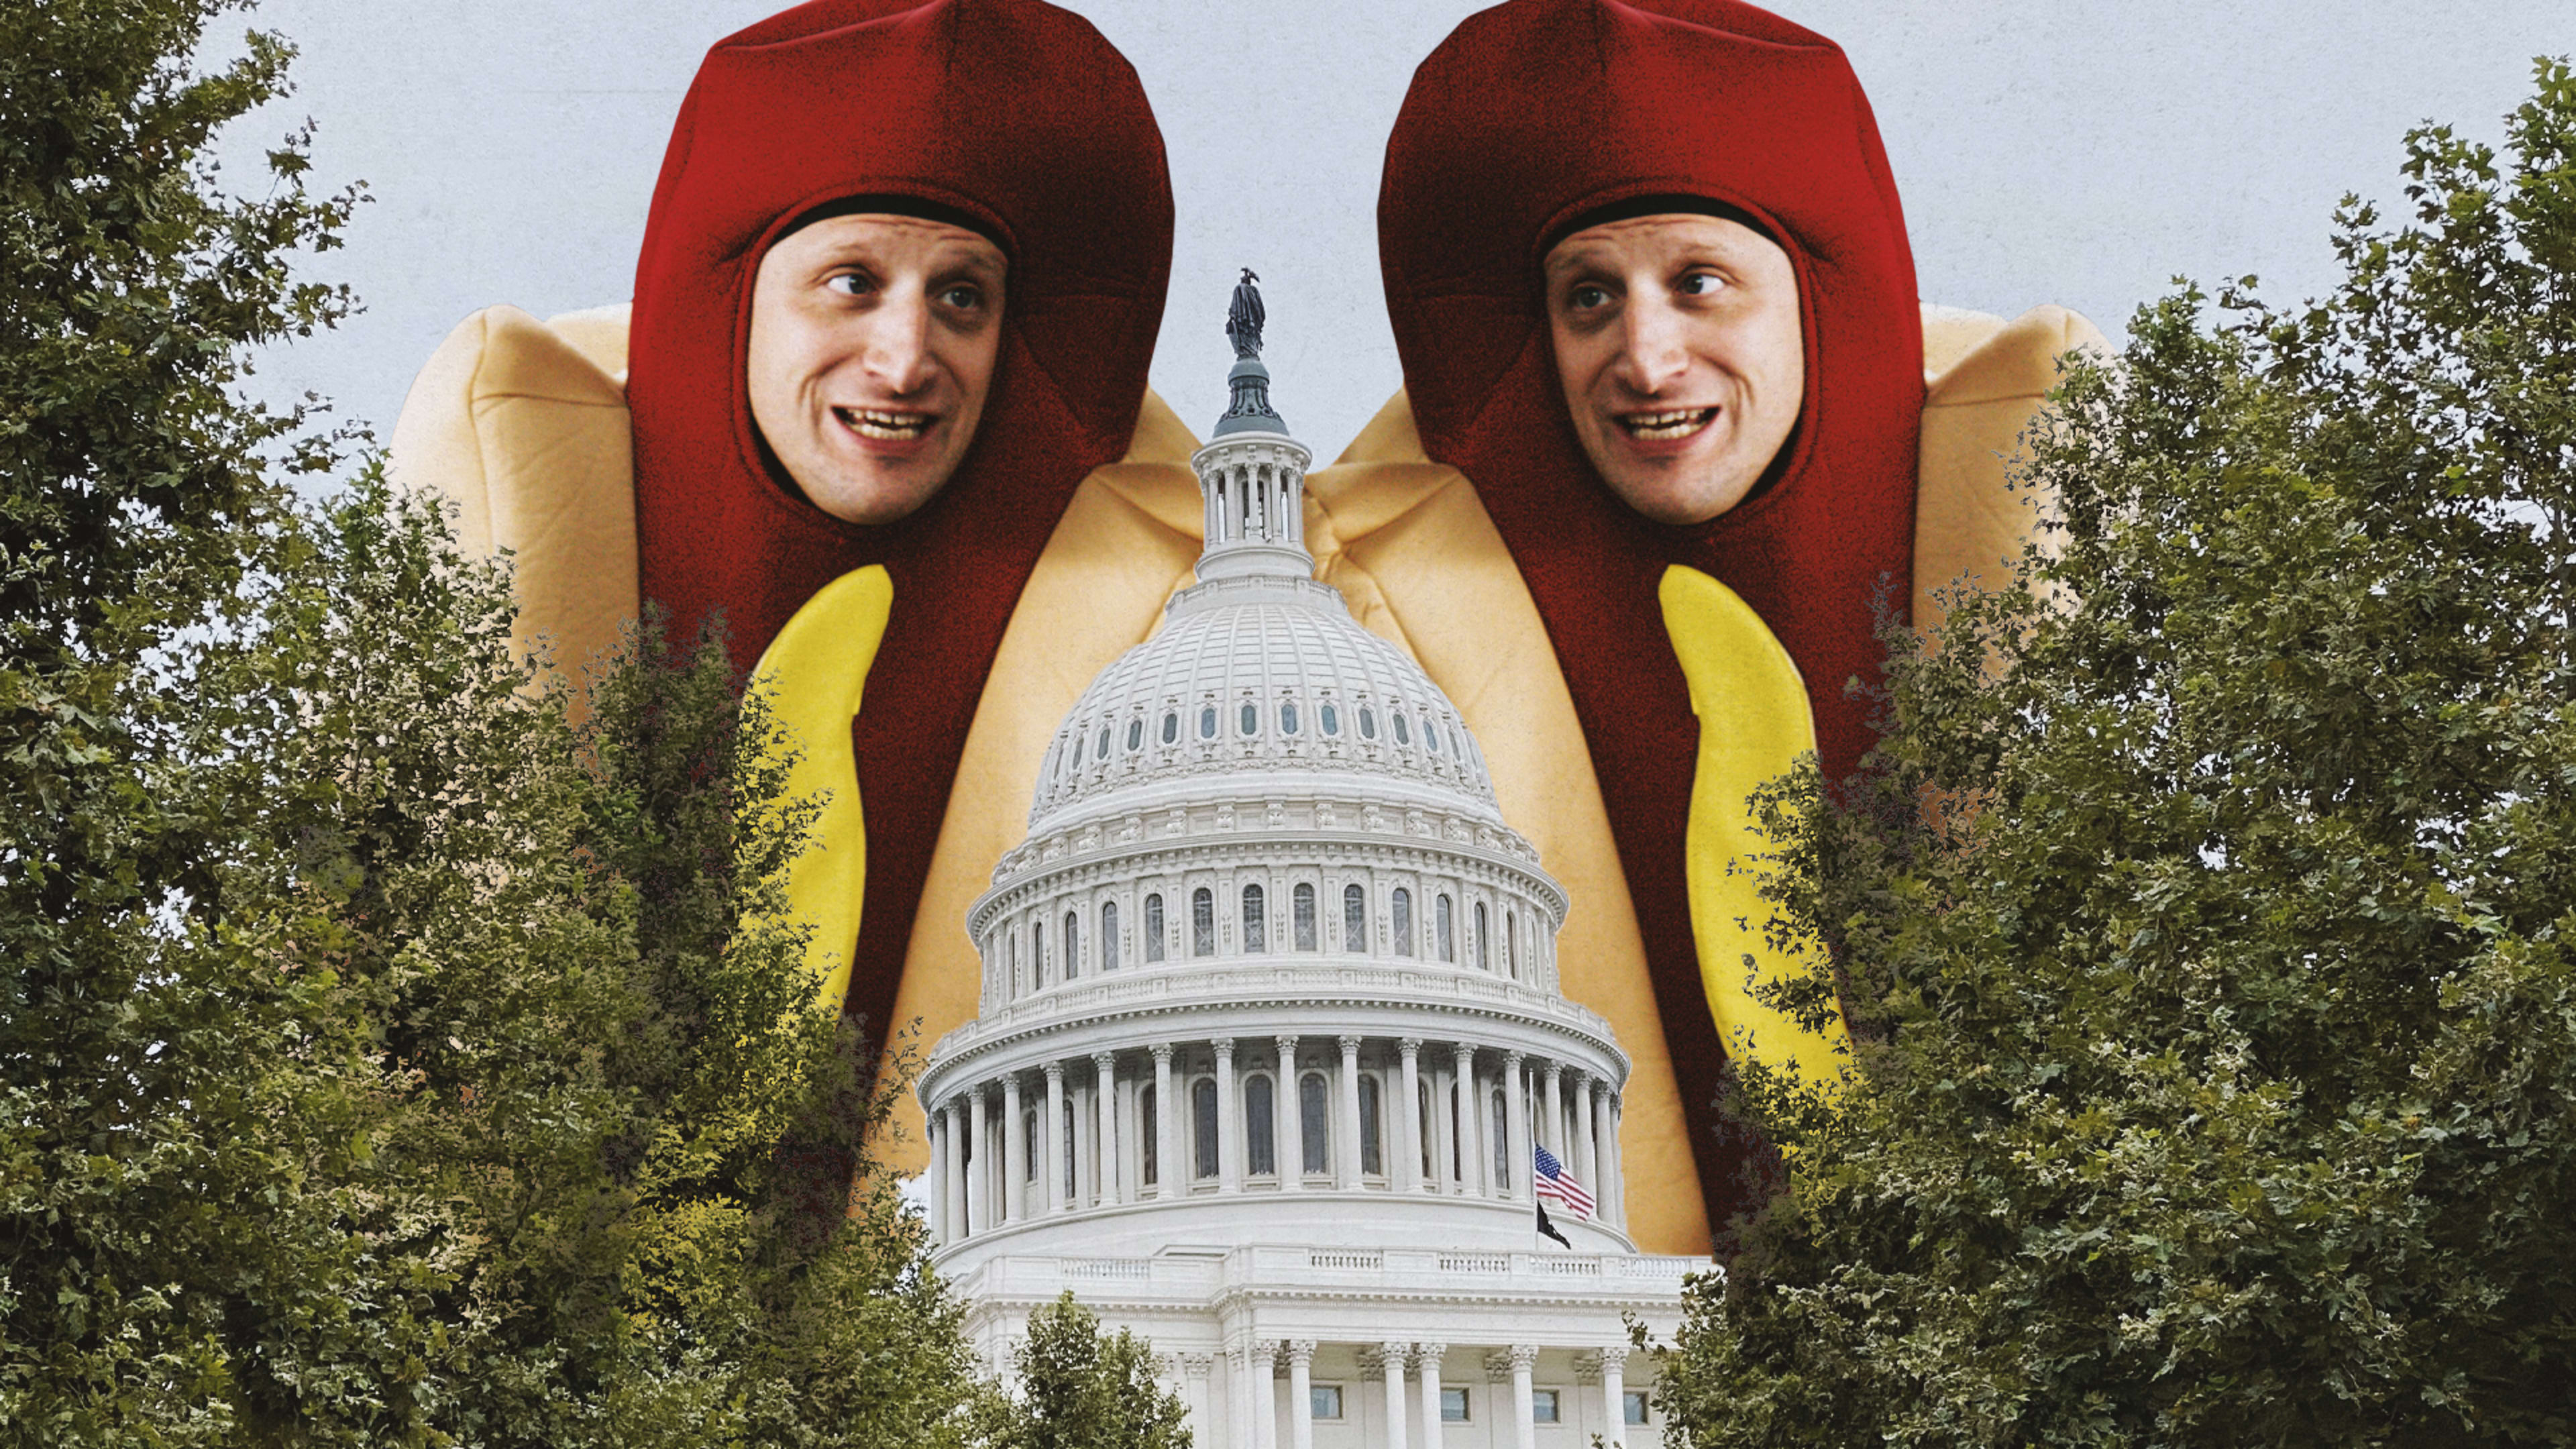 Why the Hot Dog Costume Guy meme perfectly captures the downfall of Trump